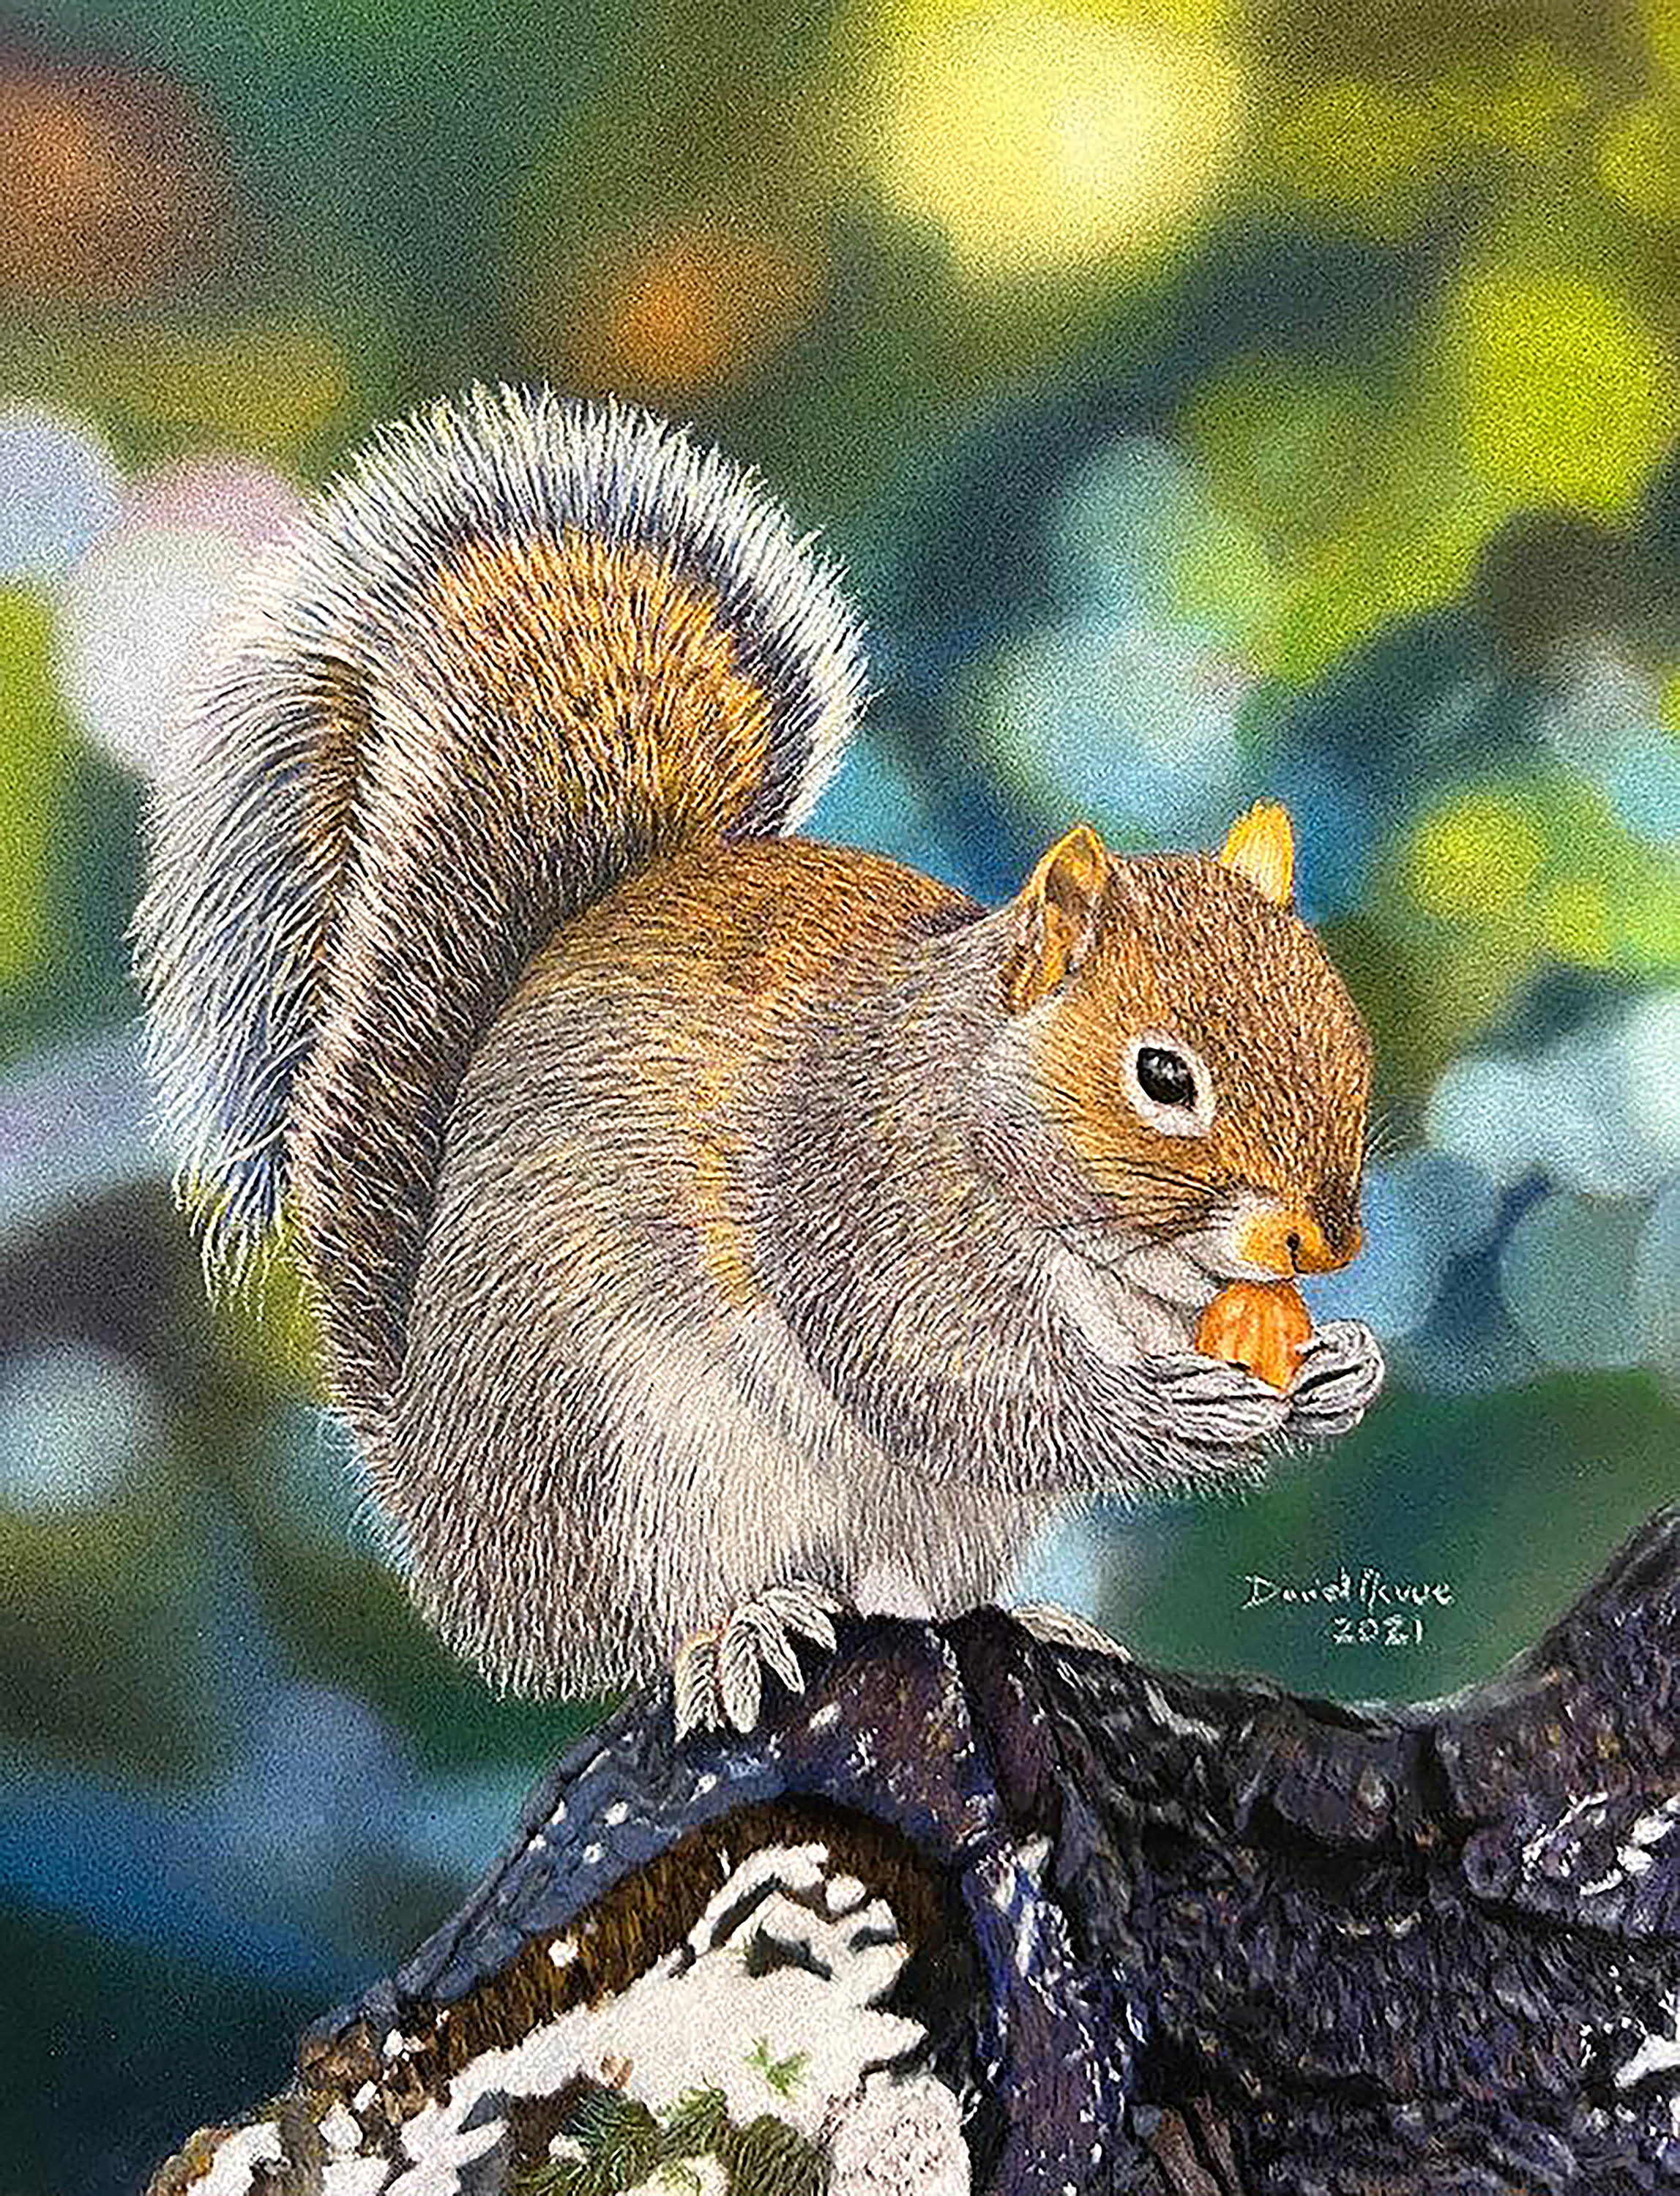 Dave nevue   snack time squirrel  special edition 8 x 10 matted print   60xs xij84o